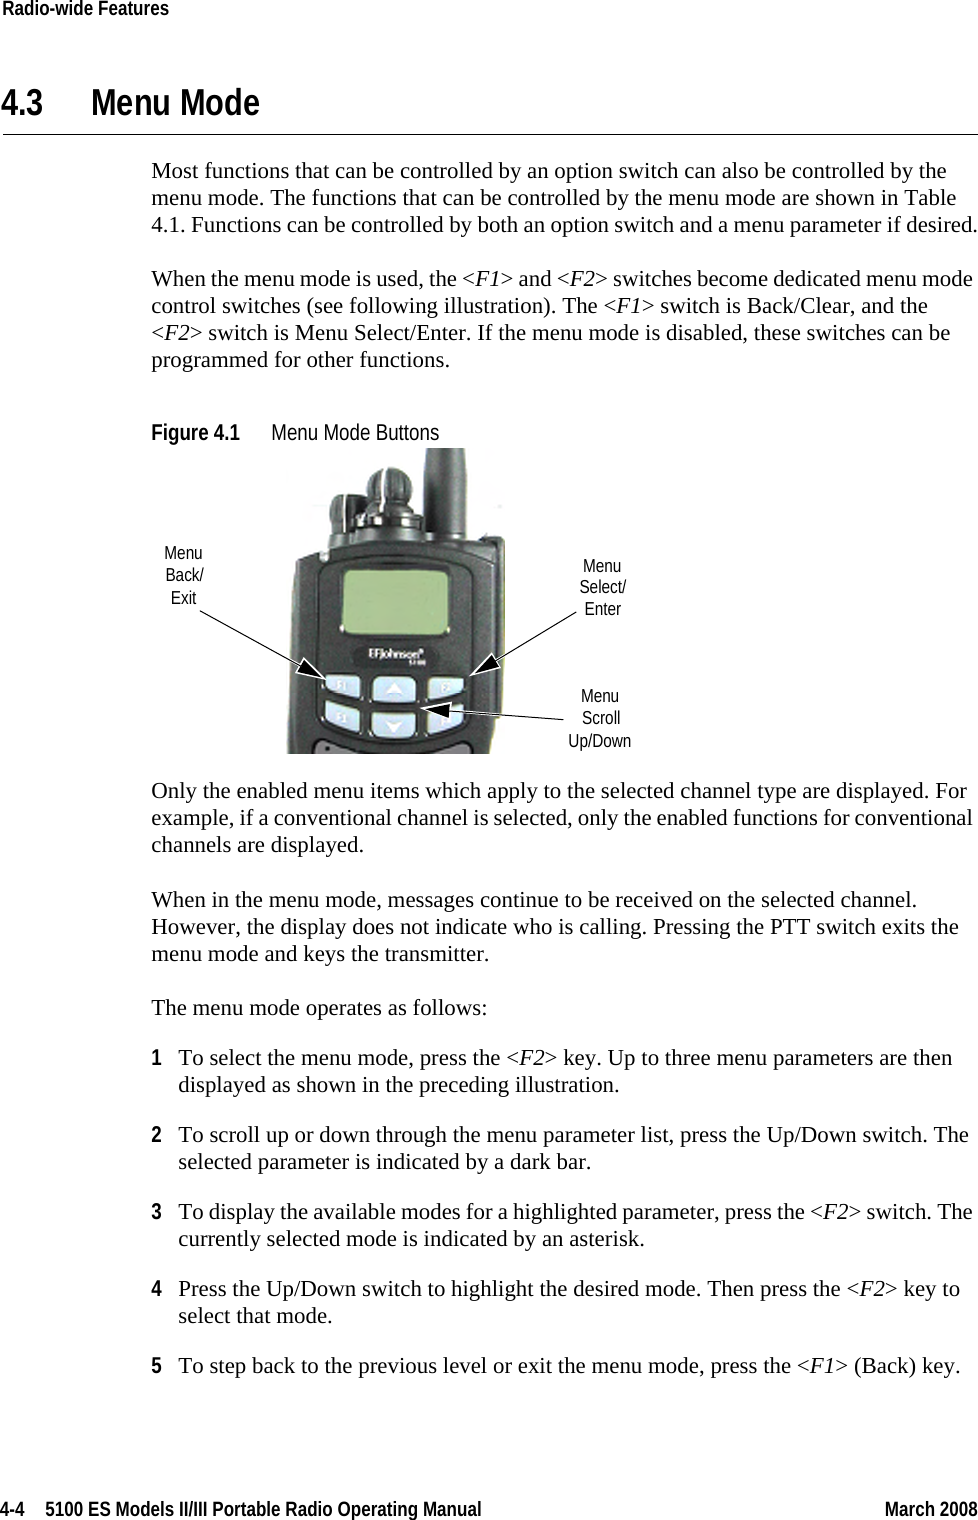 4-4  5100 ES Models II/III Portable Radio Operating Manual March 2008Radio-wide Features 4.3 Menu ModeMost functions that can be controlled by an option switch can also be controlled by the menu mode. The functions that can be controlled by the menu mode are shown in Table 4.1. Functions can be controlled by both an option switch and a menu parameter if desired.When the menu mode is used, the &lt;F1&gt; and &lt;F2&gt; switches become dedicated menu mode control switches (see following illustration). The &lt;F1&gt; switch is Back/Clear, and the &lt;F2&gt; switch is Menu Select/Enter. If the menu mode is disabled, these switches can be programmed for other functions.Figure 4.1 Menu Mode Buttons Only the enabled menu items which apply to the selected channel type are displayed. For example, if a conventional channel is selected, only the enabled functions for conventional channels are displayed.When in the menu mode, messages continue to be received on the selected channel. However, the display does not indicate who is calling. Pressing the PTT switch exits the menu mode and keys the transmitter.The menu mode operates as follows:1To select the menu mode, press the &lt;F2&gt; key. Up to three menu parameters are then displayed as shown in the preceding illustration.2To scroll up or down through the menu parameter list, press the Up/Down switch. The selected parameter is indicated by a dark bar.3To display the available modes for a highlighted parameter, press the &lt;F2&gt; switch. The currently selected mode is indicated by an asterisk.4Press the Up/Down switch to highlight the desired mode. Then press the &lt;F2&gt; key to select that mode.5To step back to the previous level or exit the menu mode, press the &lt;F1&gt; (Back) key.MenuExitBack/ MenuSelect/EnterMenuScrollUp/Down